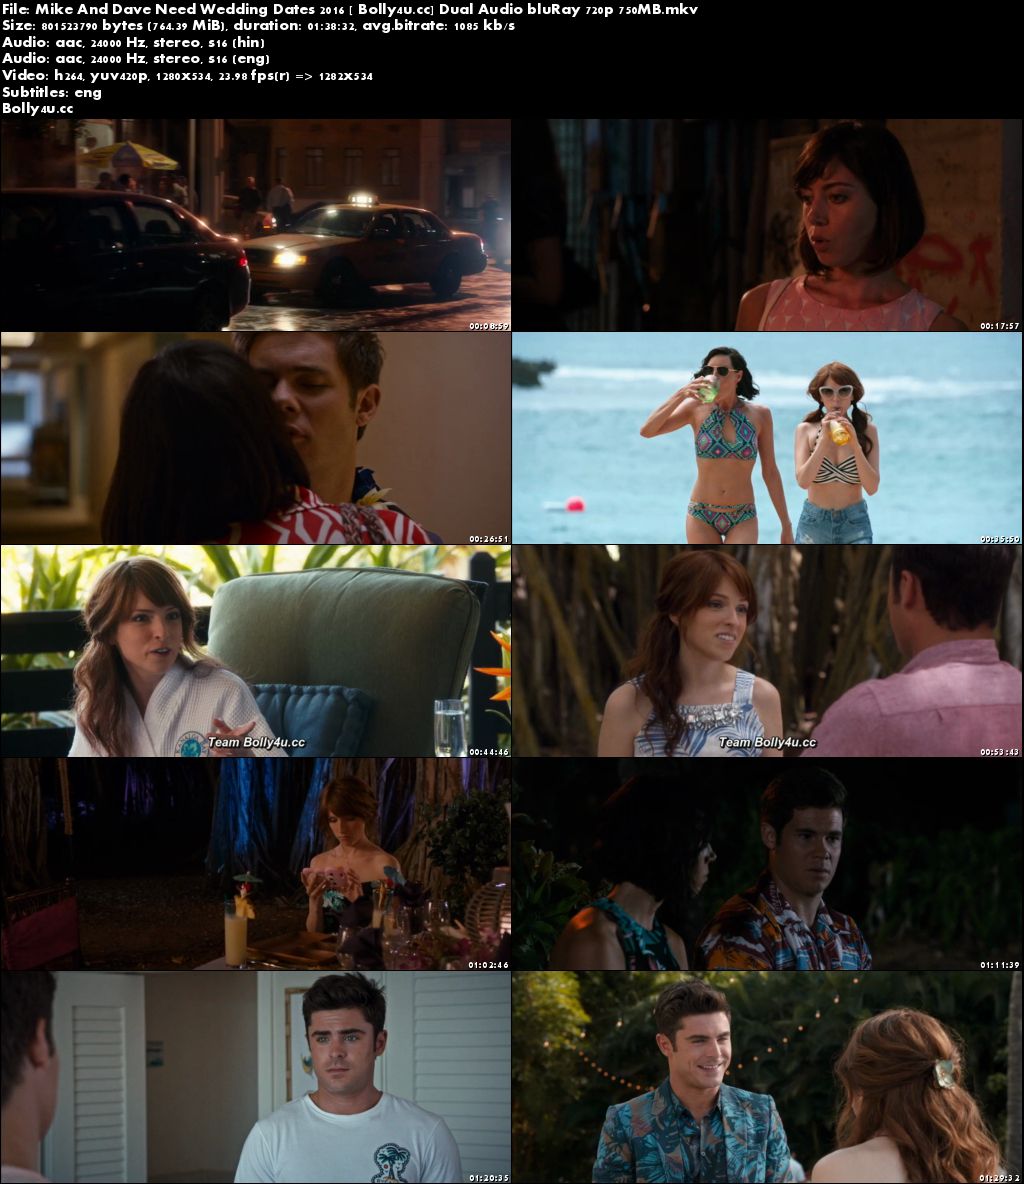 Mike And Dave Need Wedding Dates 2016 BRRip 750MB Hindi Dual Audio 720p Download